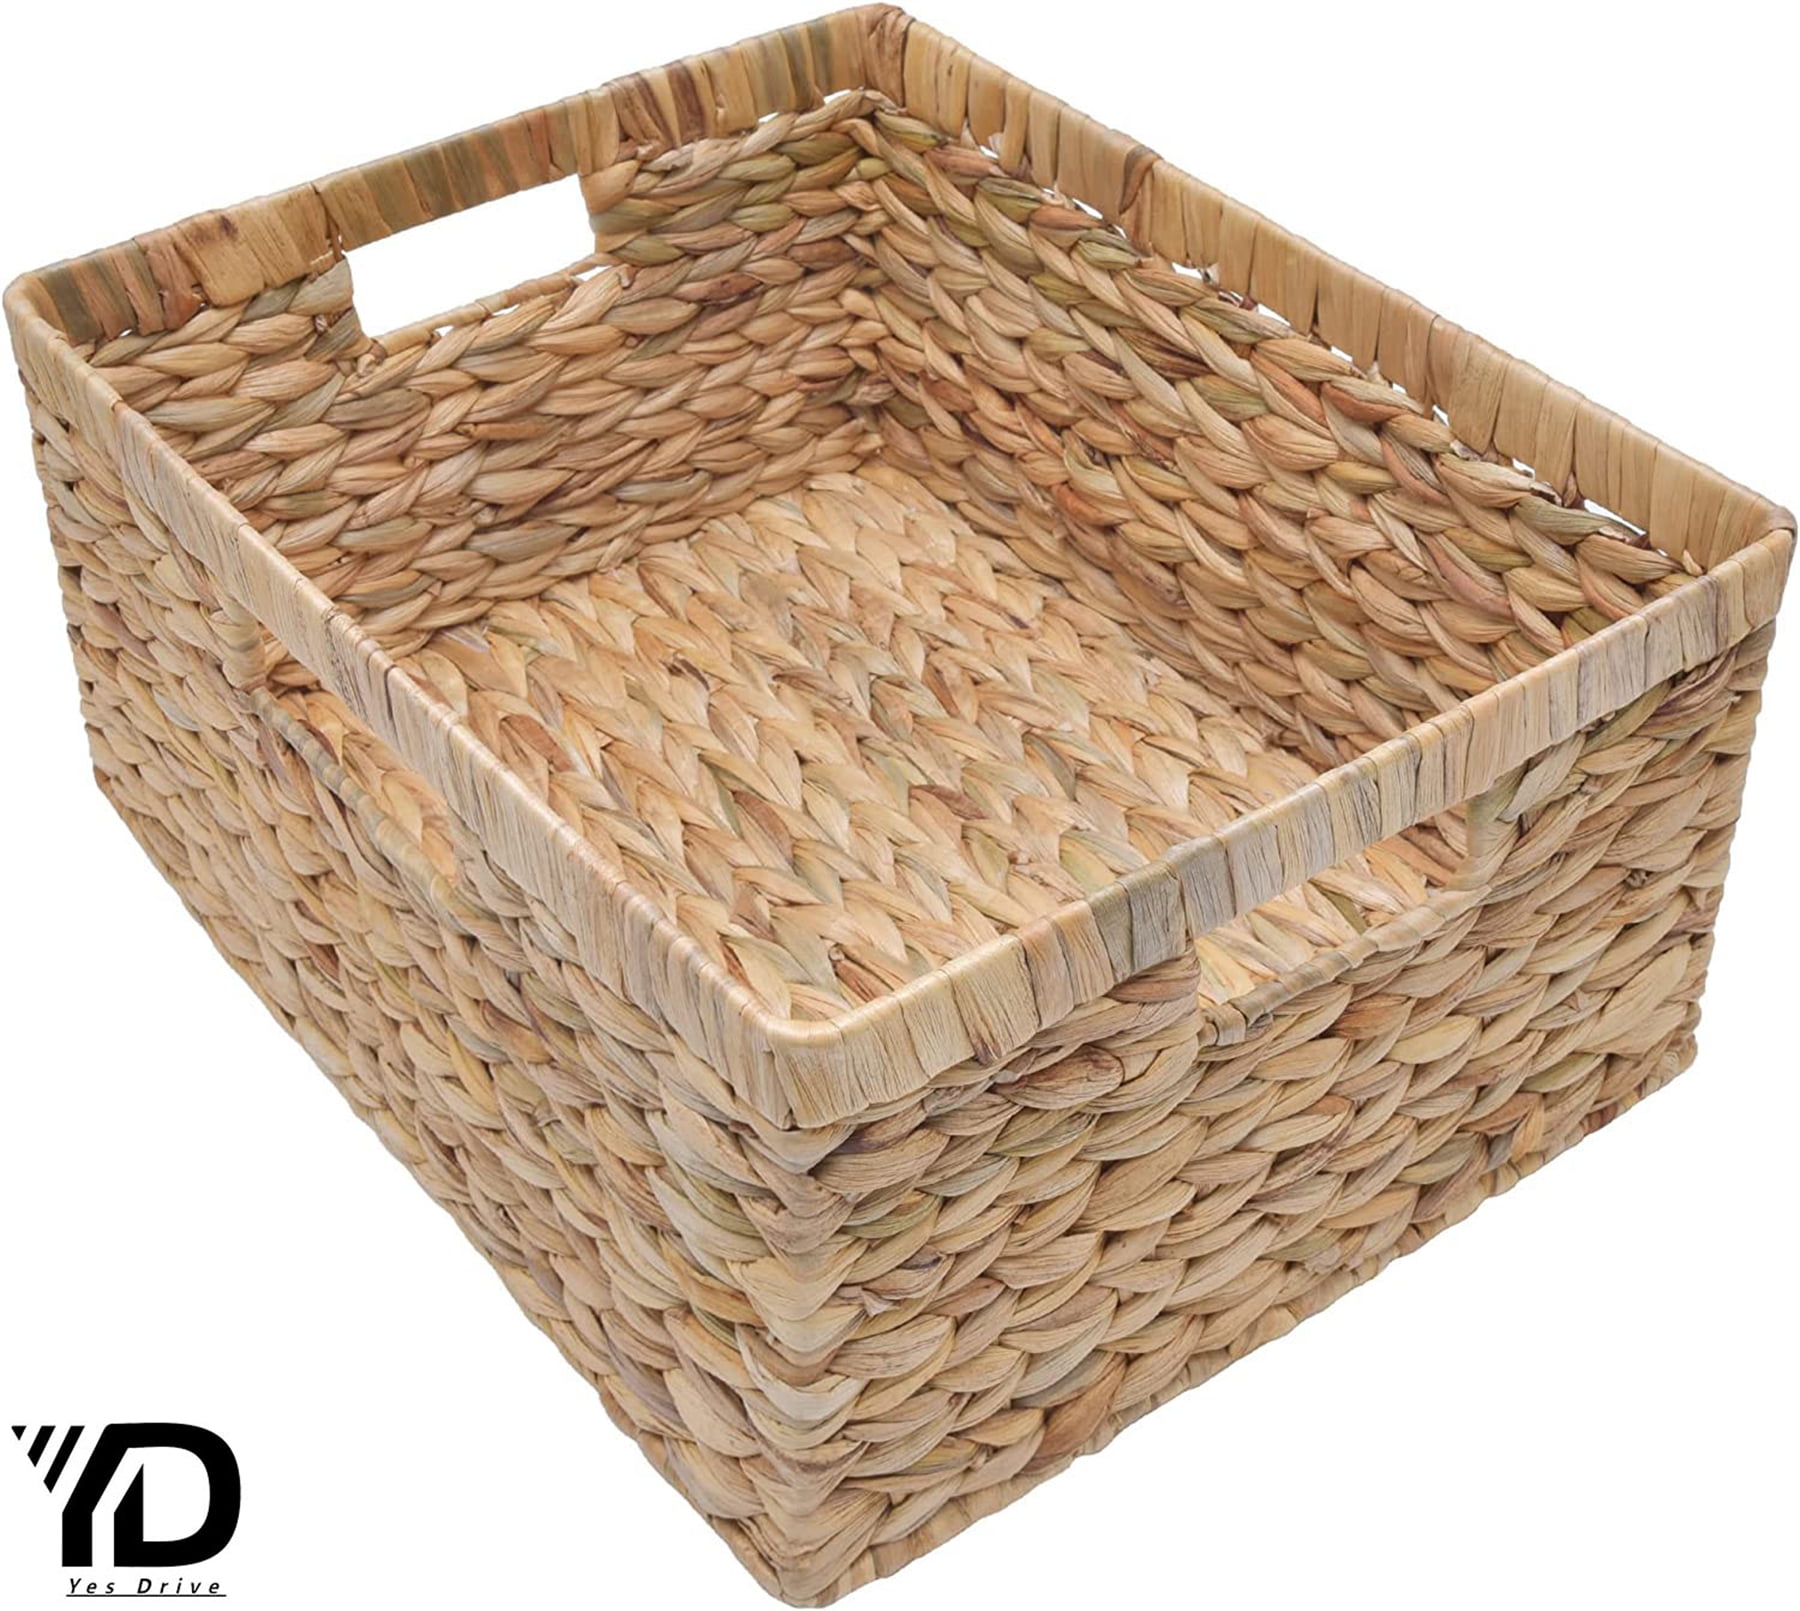 Best Choice Products 10.5x10.5in Hyacinth Storage Baskets, Set of 5 Multipurpose Collapsible Organizers - Natural